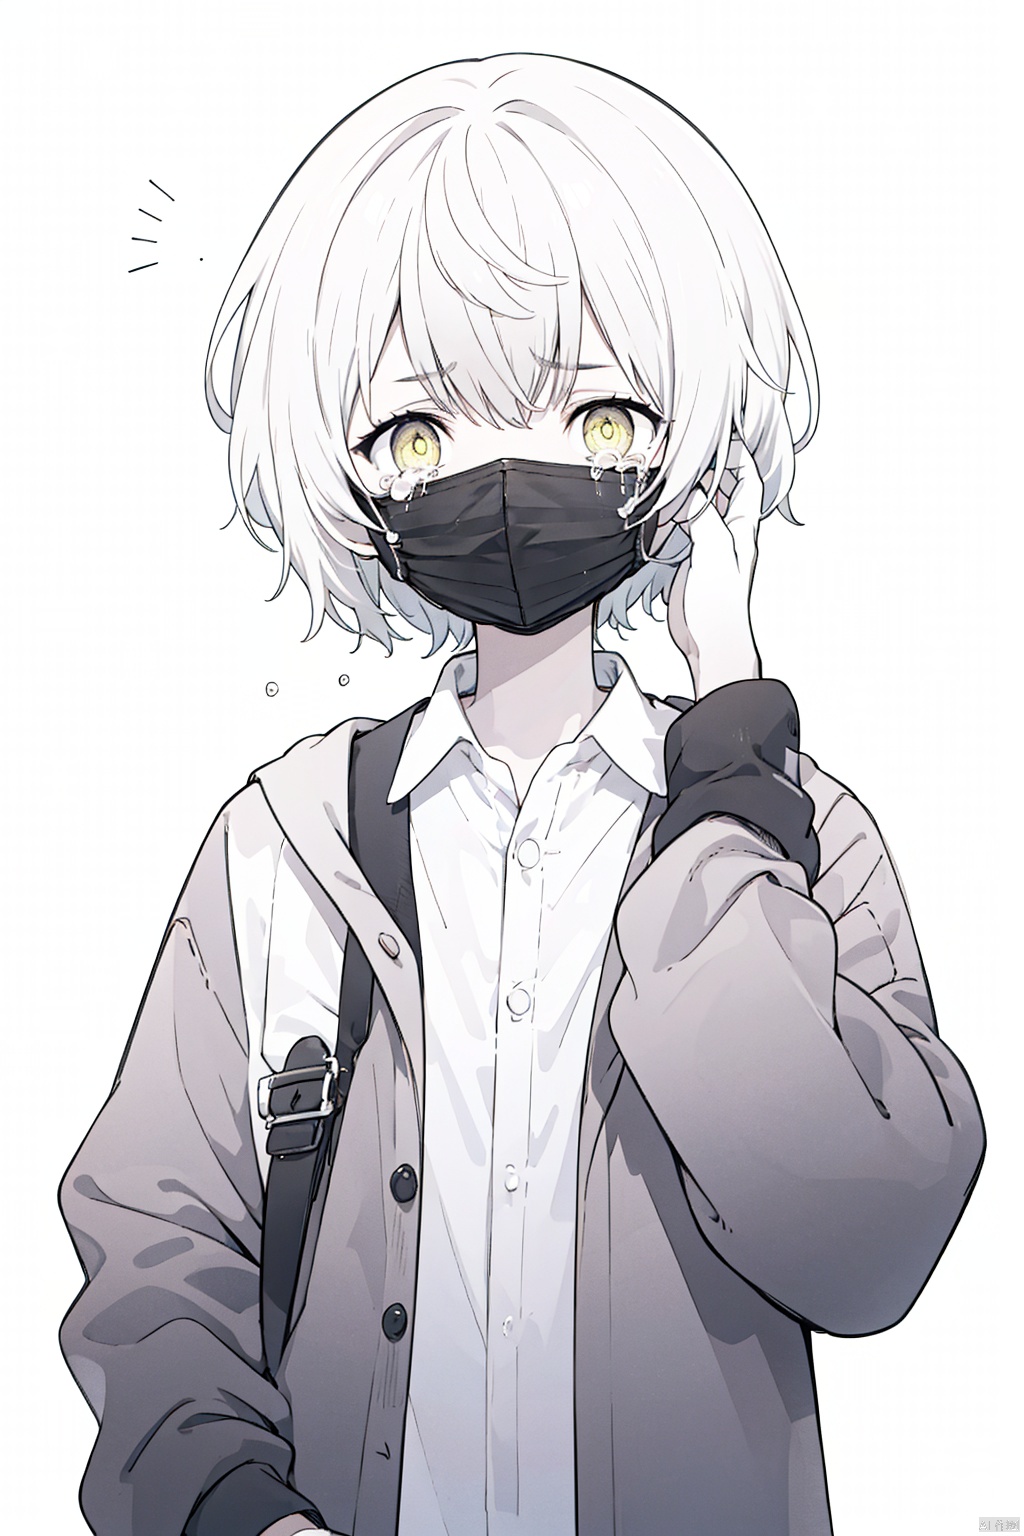 1boy, 1girl, collared_shirt, crying, crying_with_eyes_open, gloves, greyscale, greyscale_with_colored_background, hand_on_another's_head, highres, mask, monochrome, nai0524, parted_lips, shinzaki_kuon, shirt, short_hair, simple_background, sniper_mask_(tenkuu_shinpan), spot_color, suit, tears, tenkuu_shinpan, trilby, upper_body, yellow_background, yellow_eyes, autoappealing, autoappealingdb, best quality, masterpiece, nai3